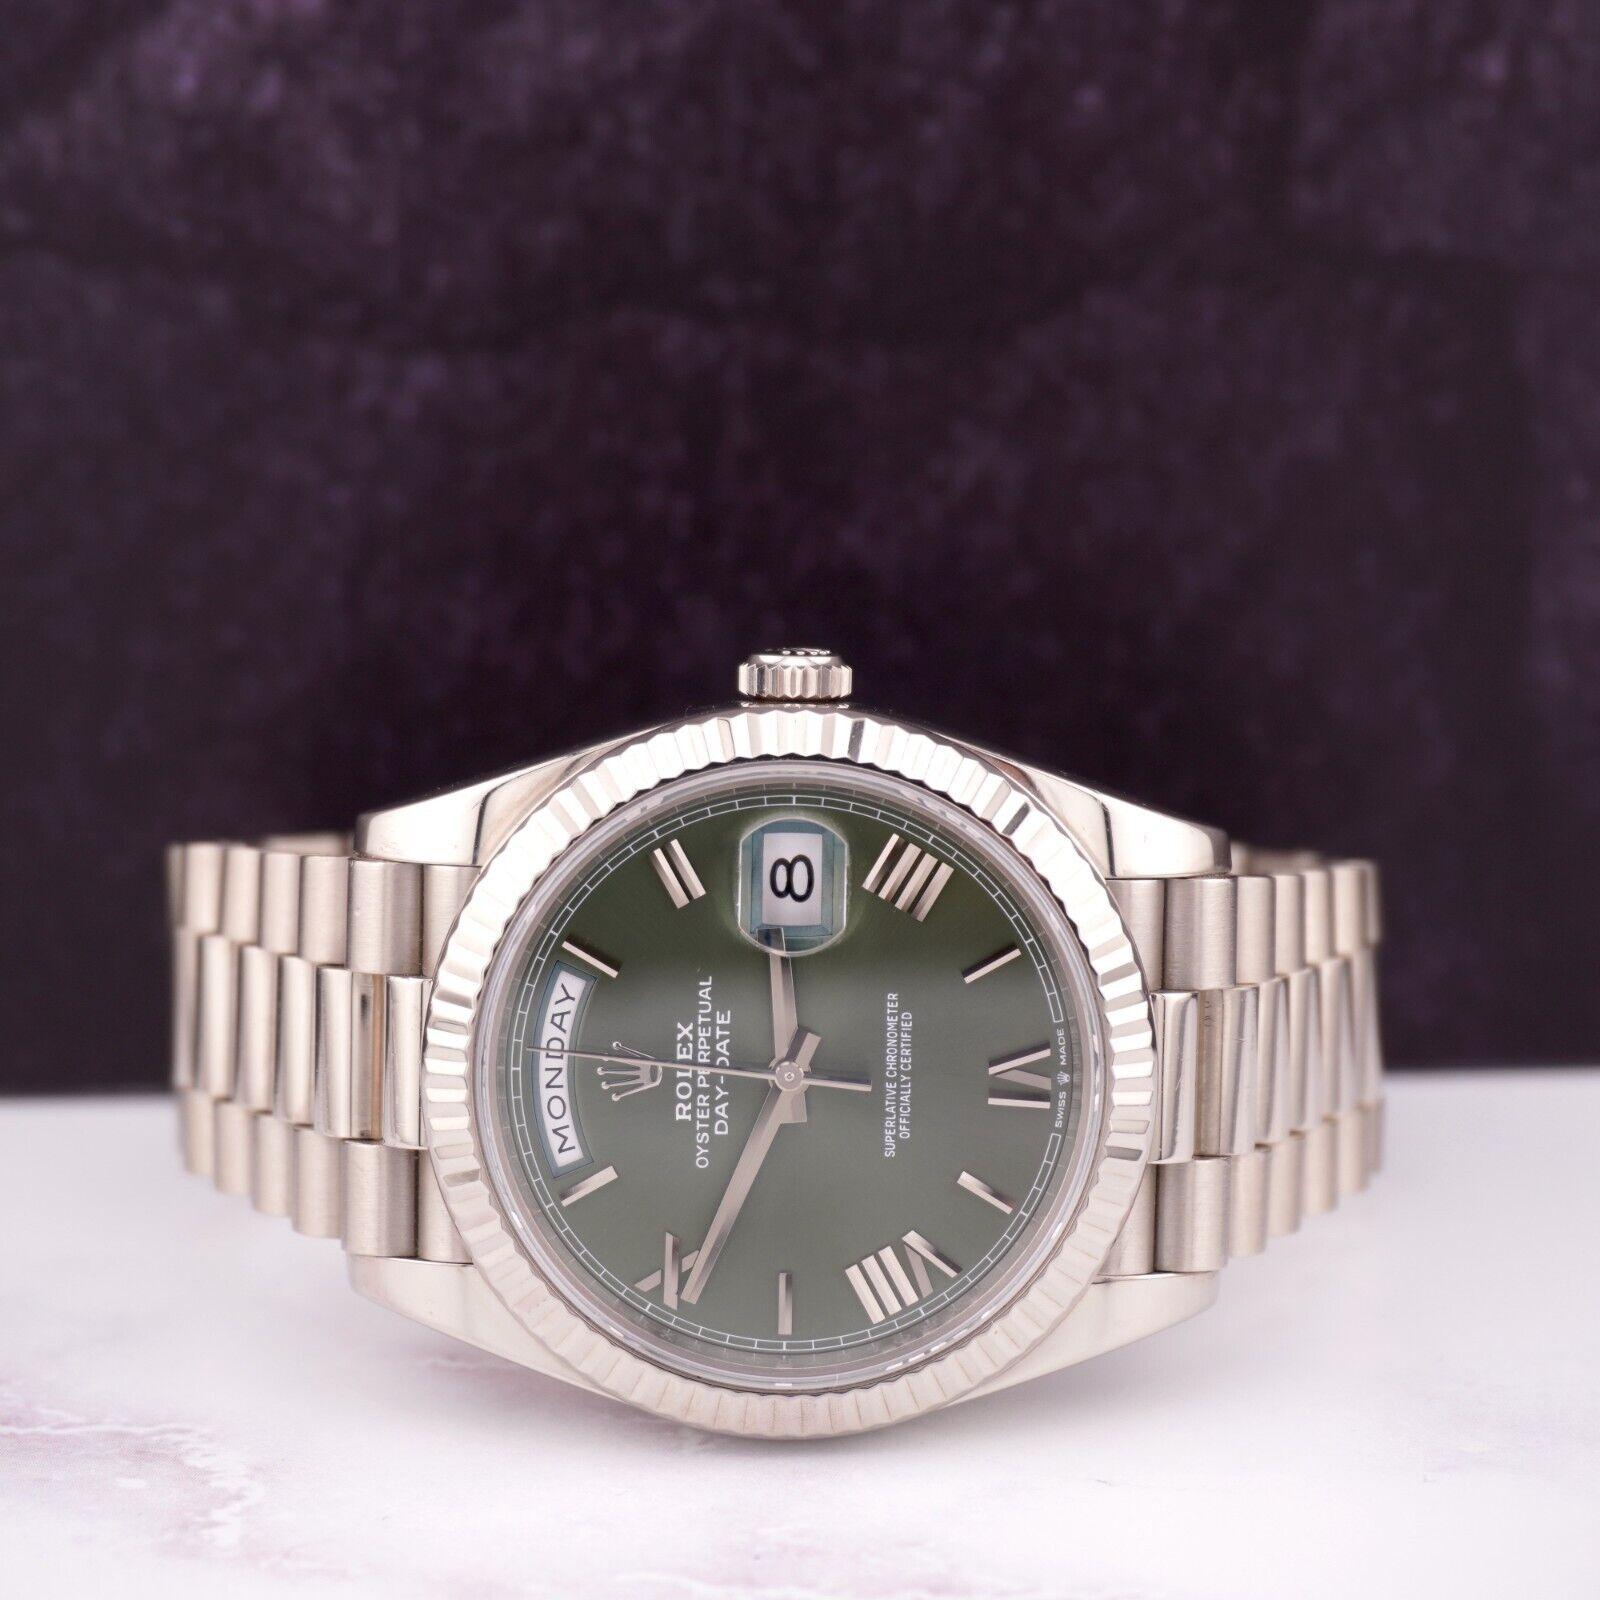 Rolex Daydate 40mm Watch

Pre-owned w/ Original Box & Card
100% Authentic Authenticity Card
Condition - (Excellent Condition) - See Pics
Watch Reference - 228239
Model - Day-Date
Dial Color - Olive Green
Material - 18k White Gold
Watch Will Fit